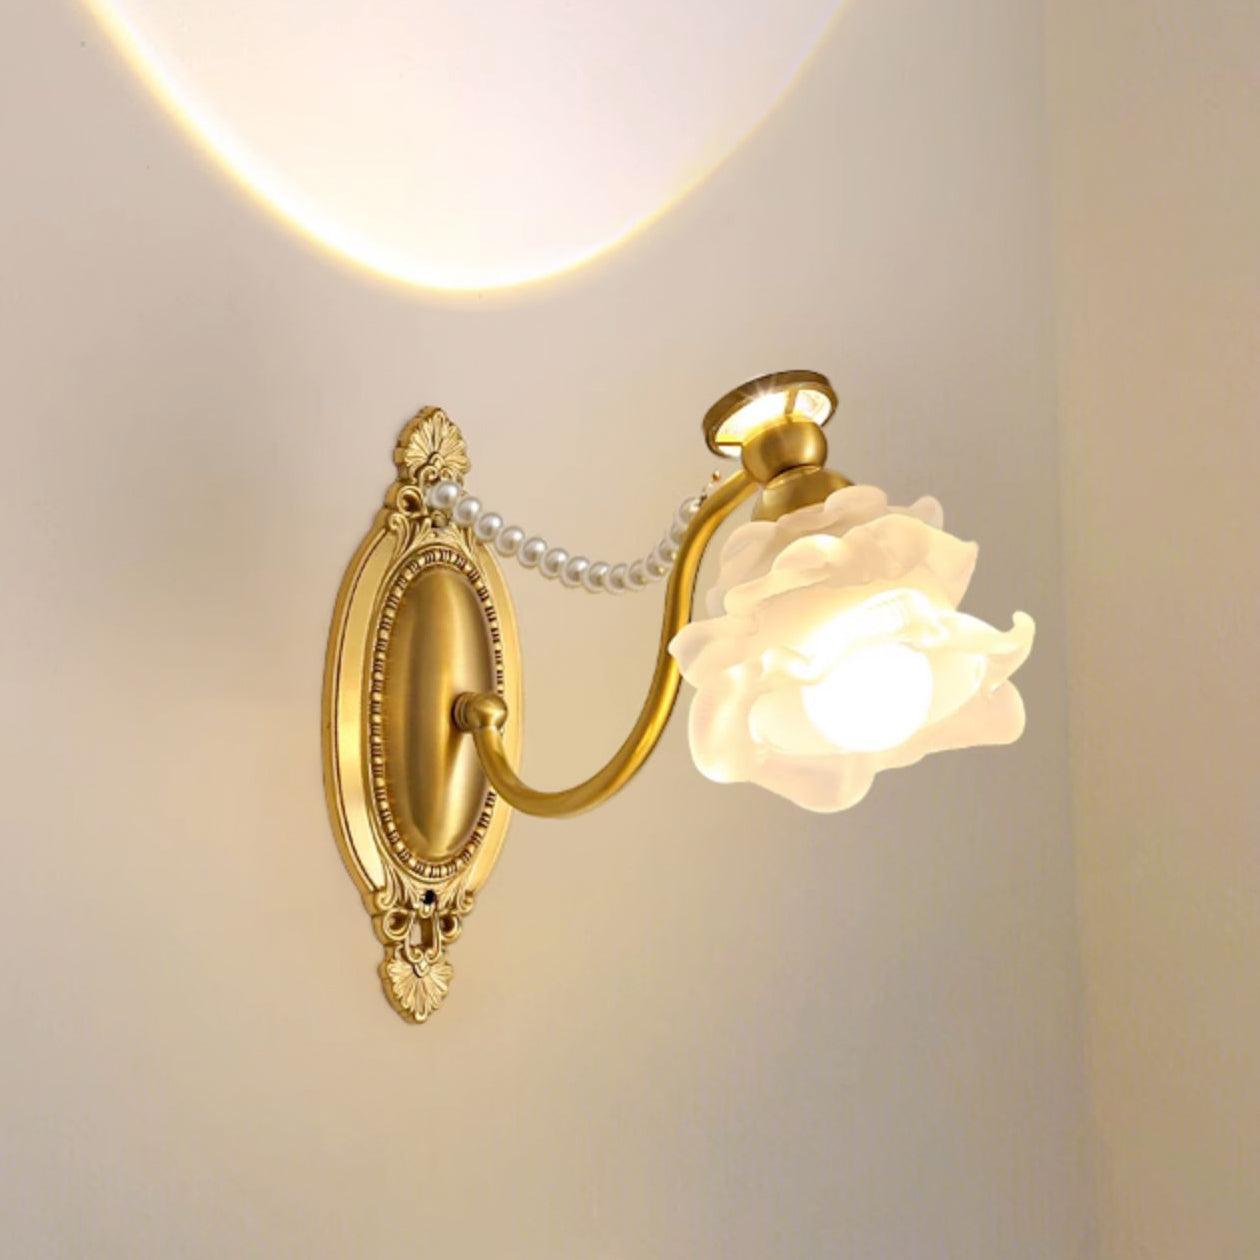 Brass Floral Wall Lamp 11.4″- 10.6″ - Docos